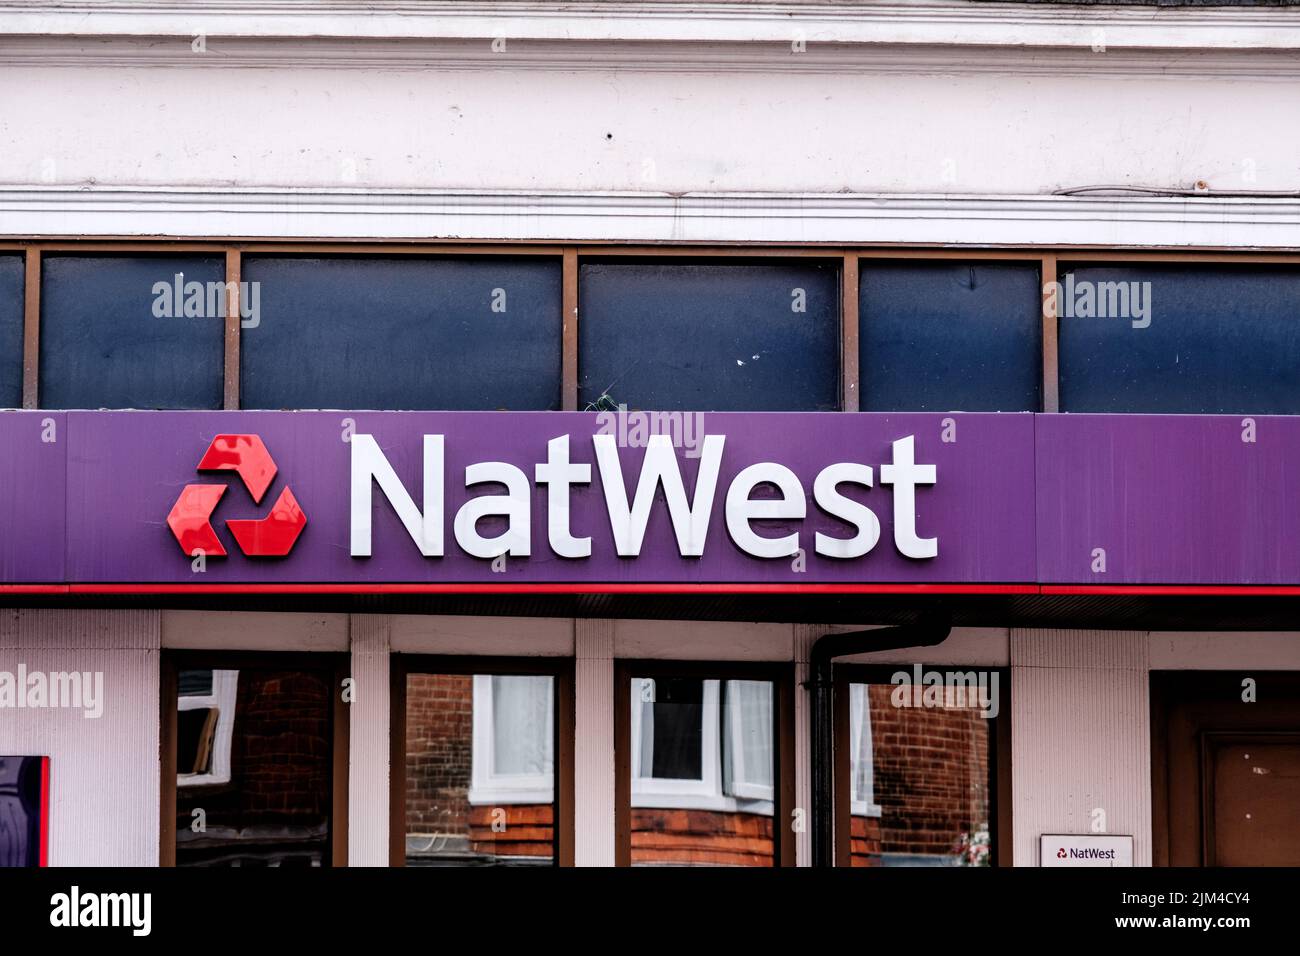 Dorking, Surrey Hills, London UK, June 30 2022, NatWest High Street Retail Bank Sign And Logo With No People Stock Photo